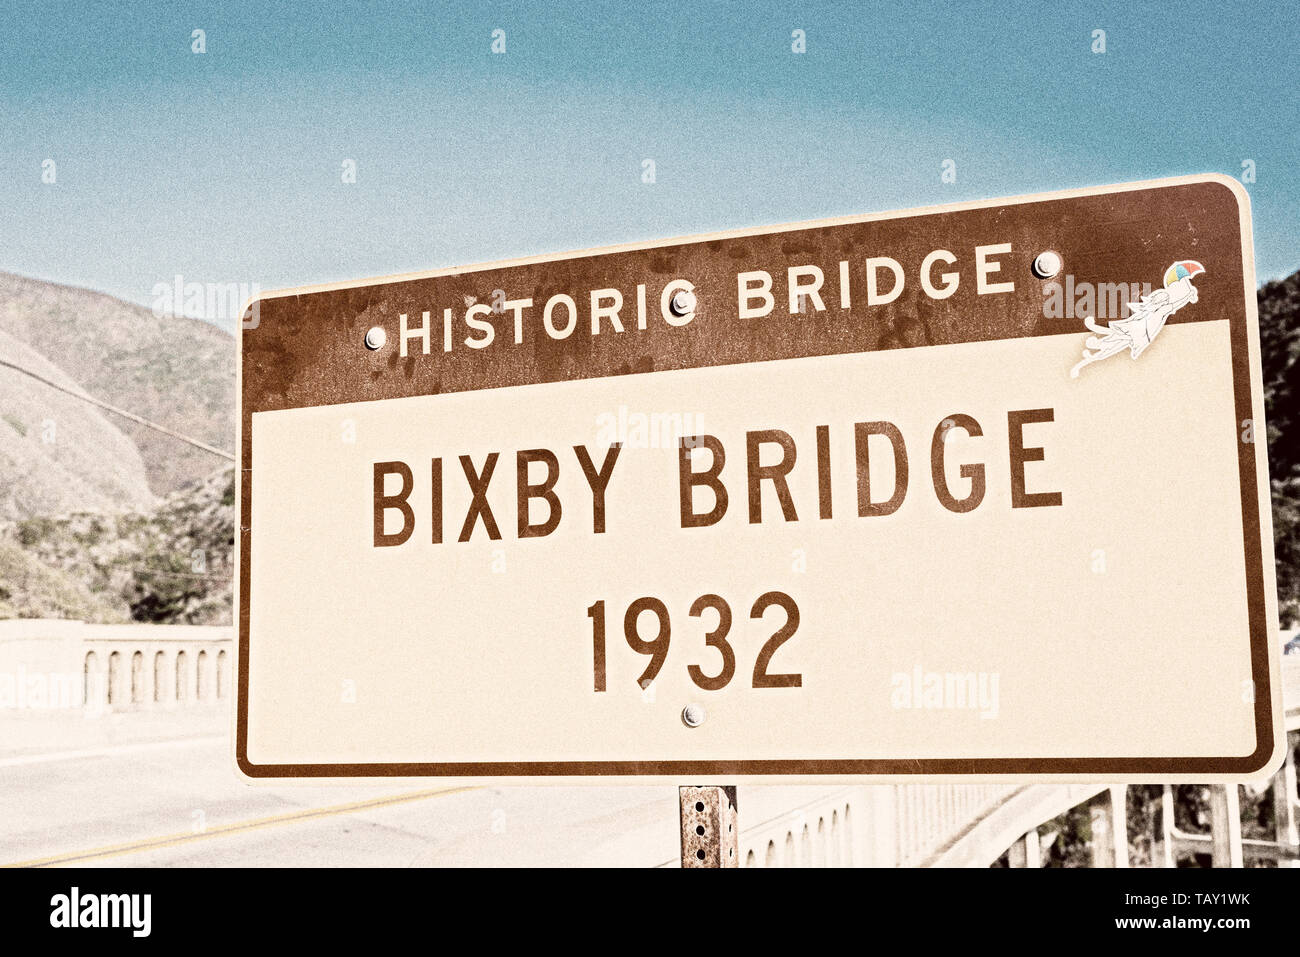 Bixby Bridge sign. Big Sur, California, United States. Photograph processed with old photo/vintage effect. Stock Photo